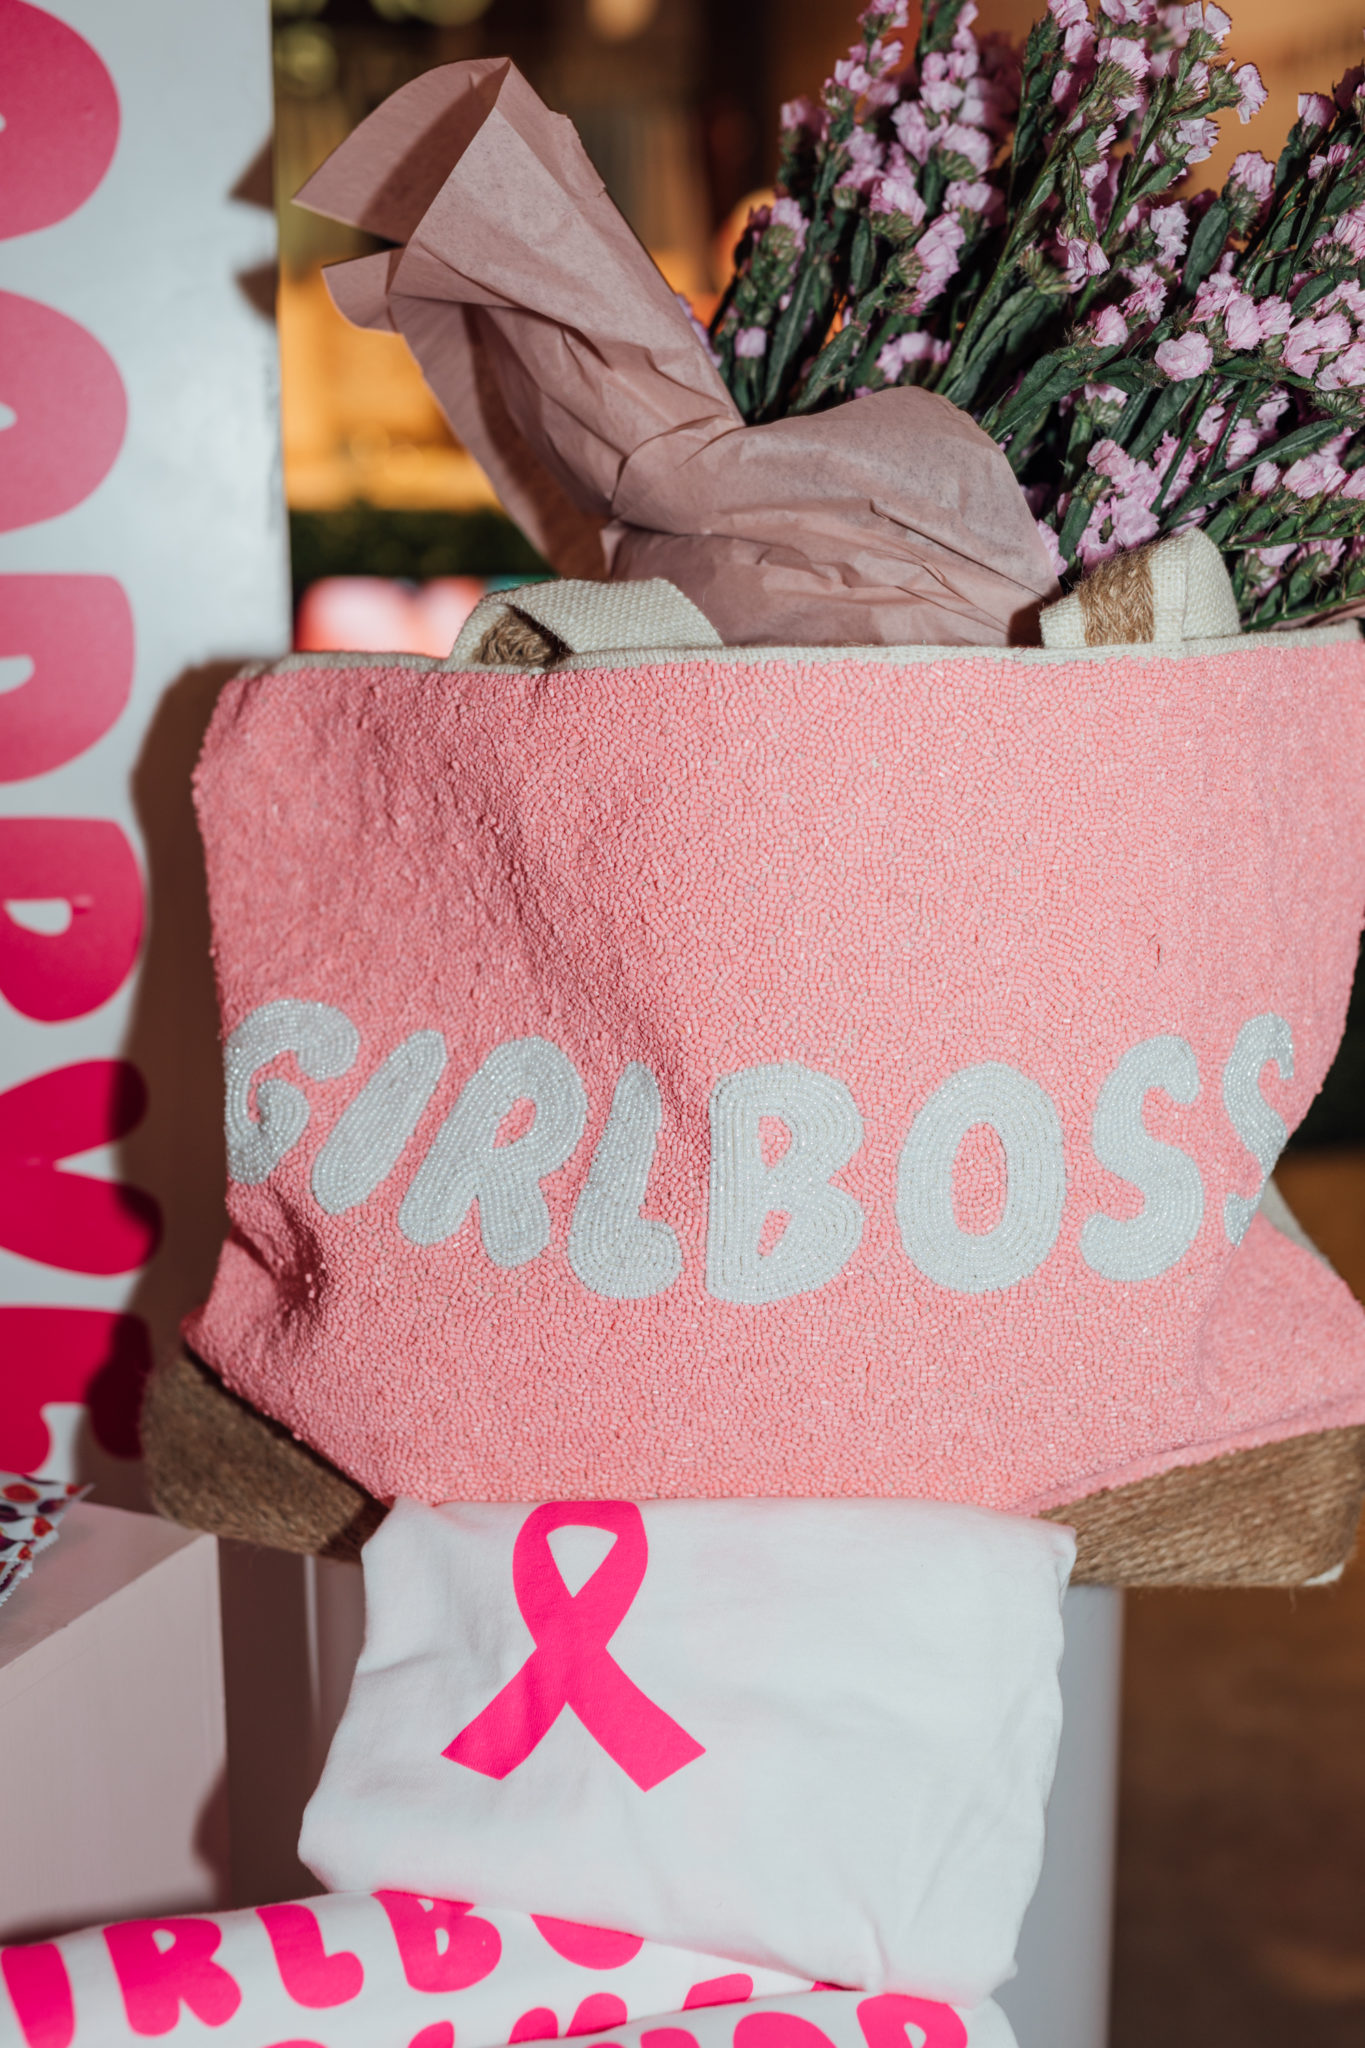 A pink custom clutch bag with the word girlboss printed on it in a white bubblegum font.